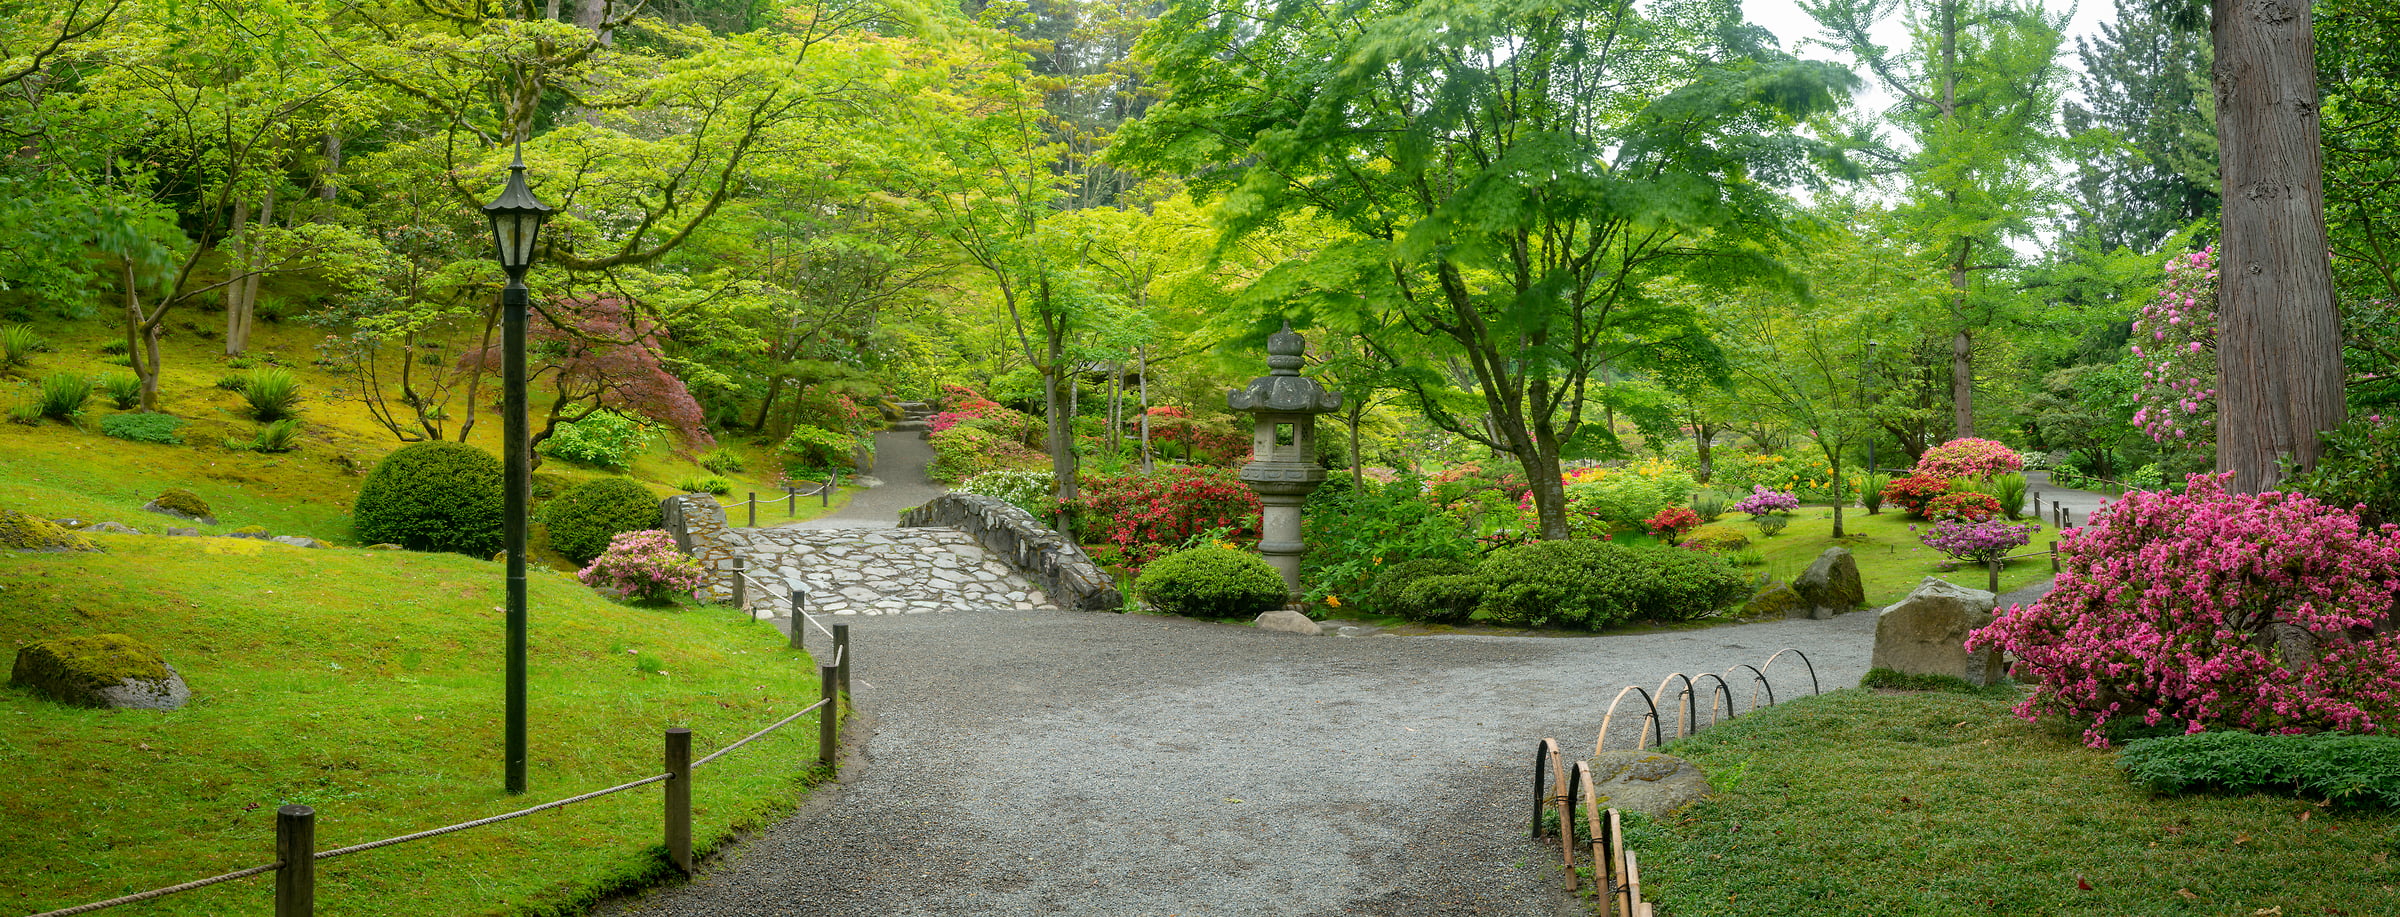 260 megapixels! A very high resolution, large-format VAST photo print of a botanical garden; photograph created by Greg Probst in Japanese Garden, Seattle.